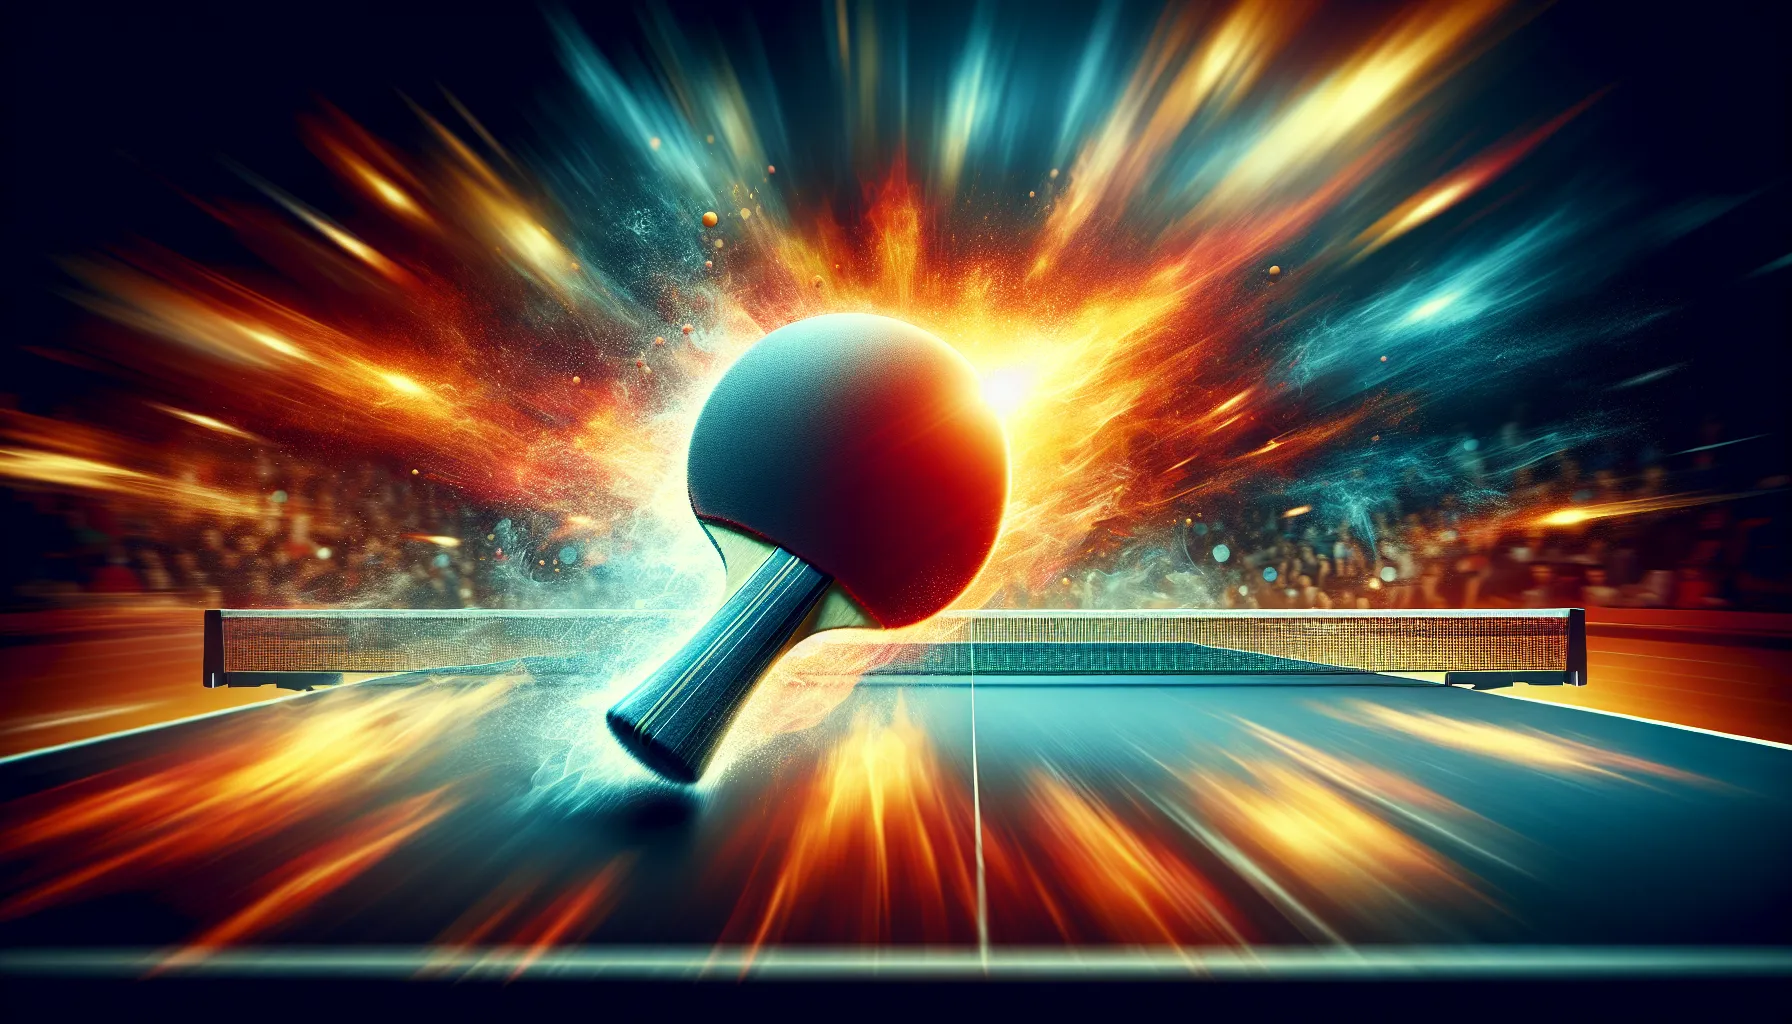 A ping-pong ball captured mid-flight, symbolizing the speed and spirit of US table tennis competitions.